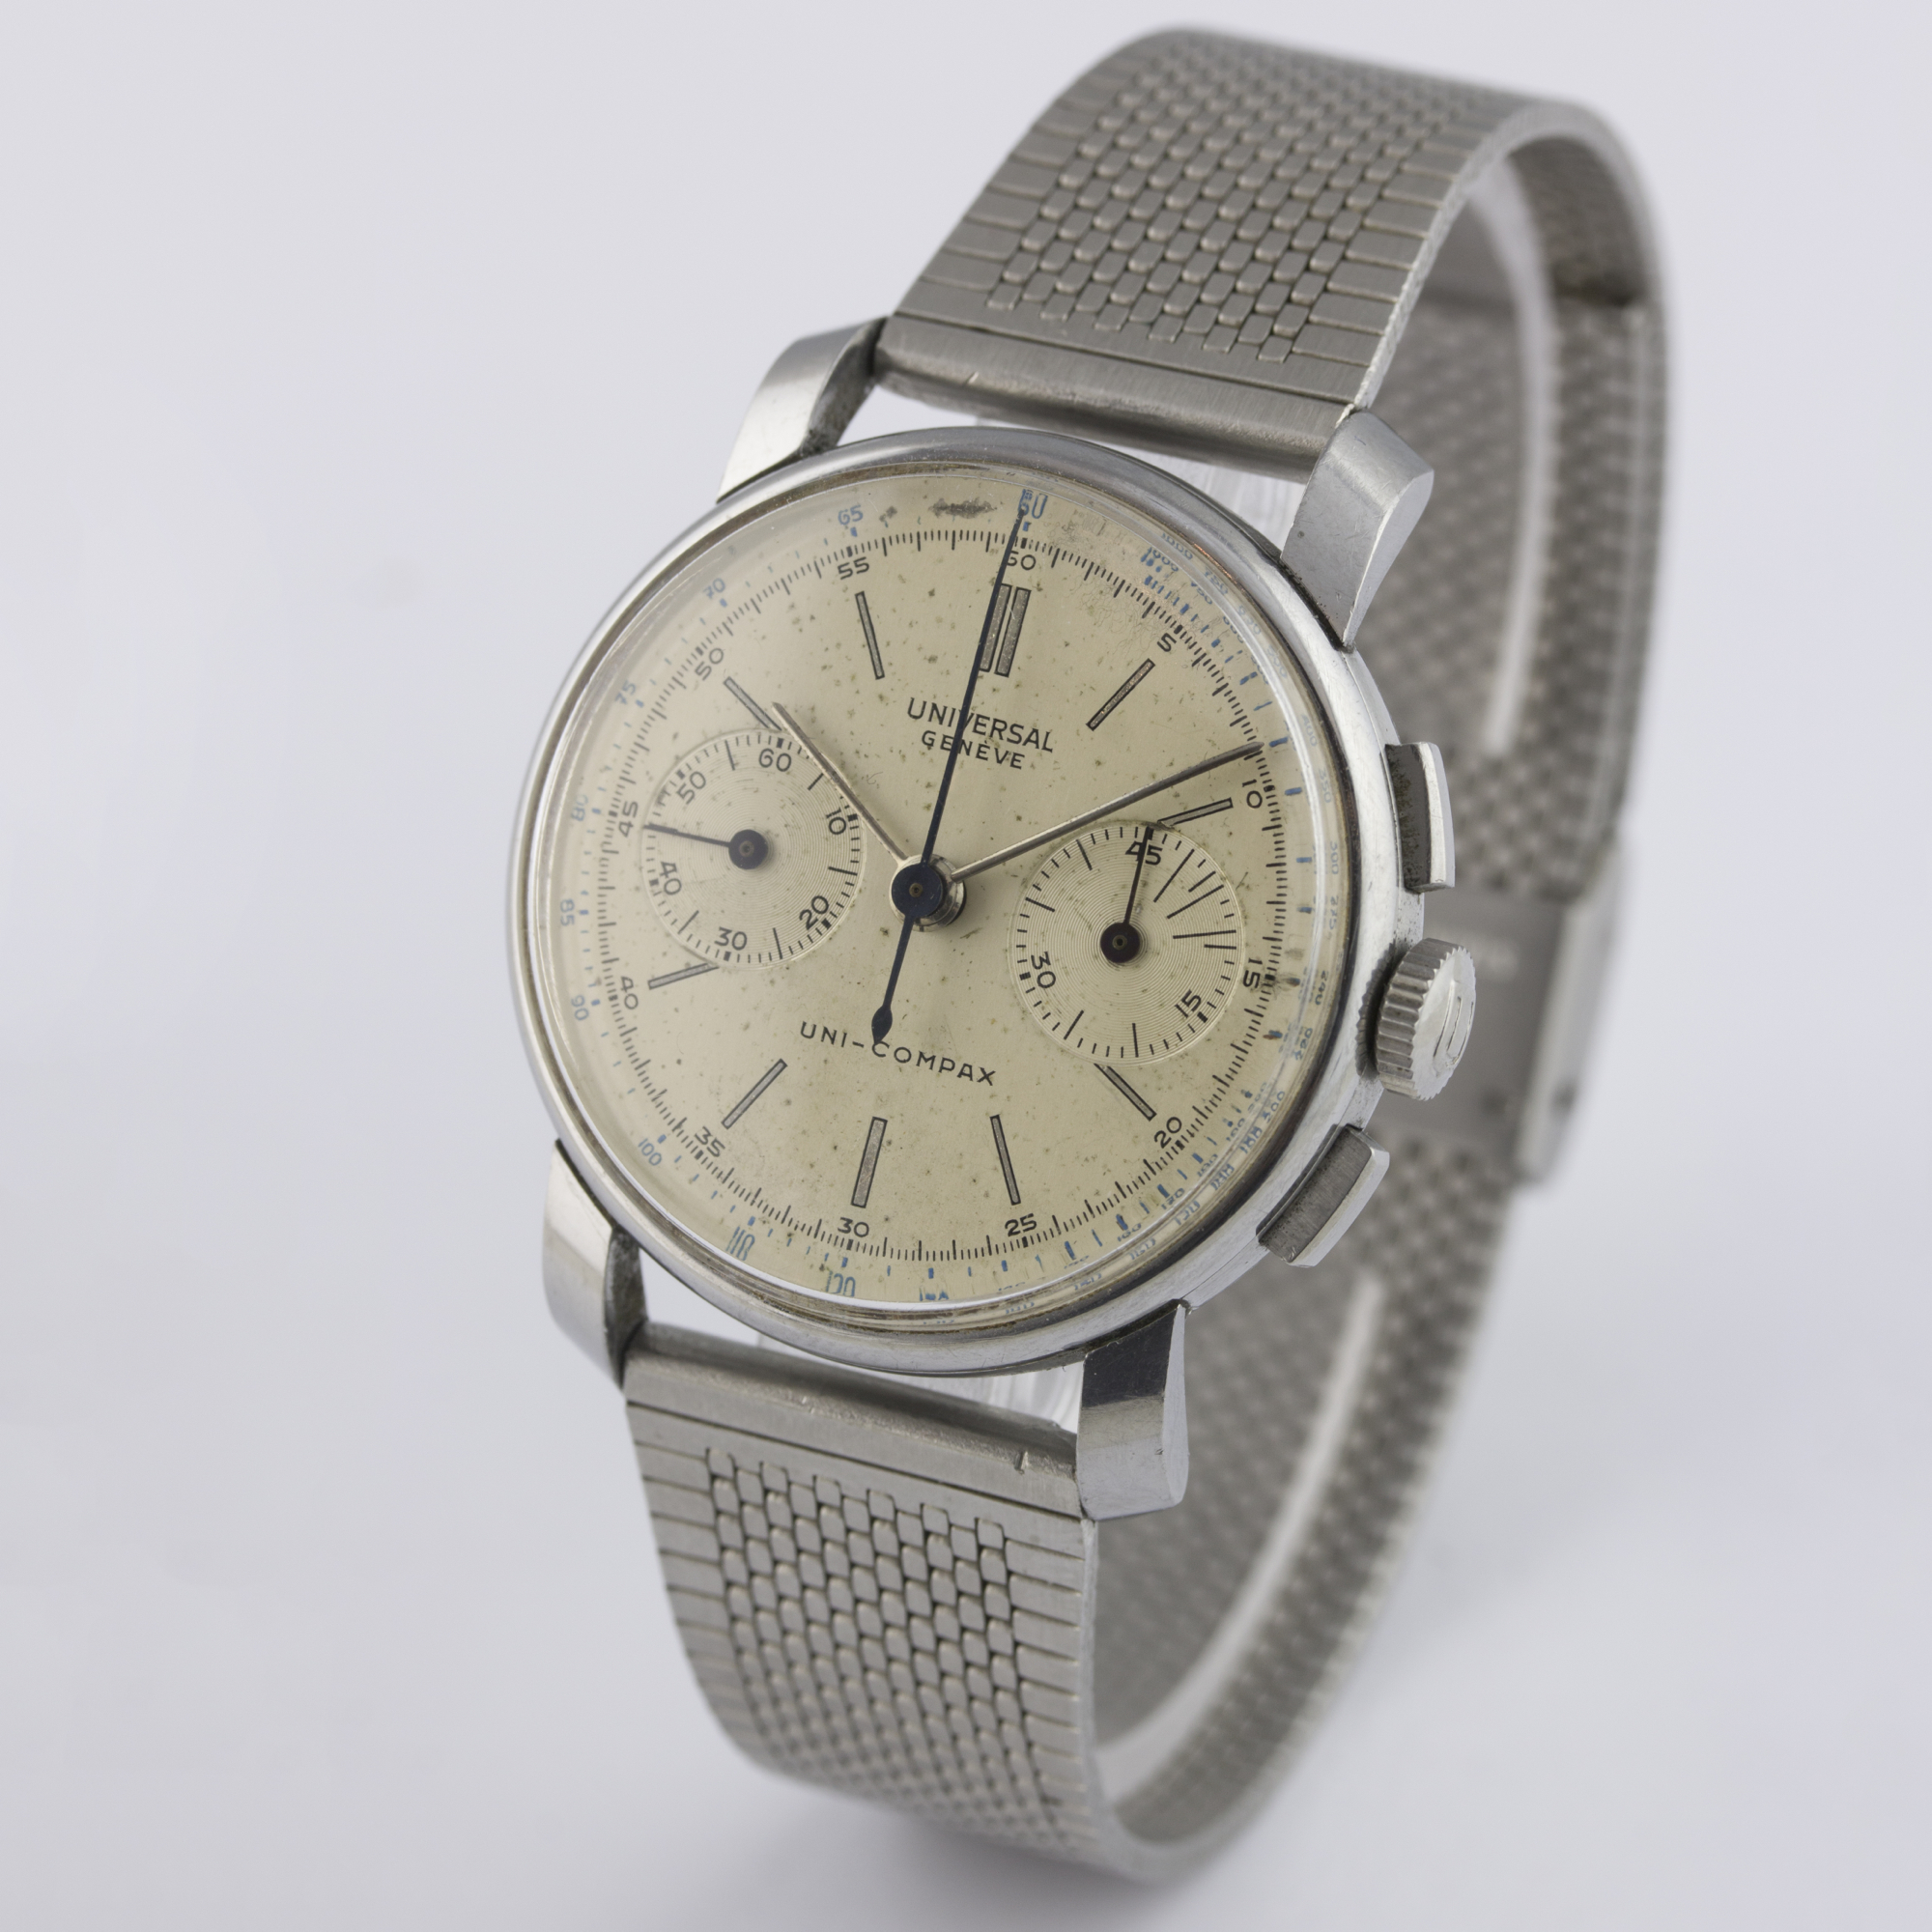 A GENTLEMAN'S STAINLESS STEEL UNIVERSAL GENEVE UNI COMPAX CHRONOGRAPH WRIST WATCH CIRCA 1940s D: - Image 4 of 8